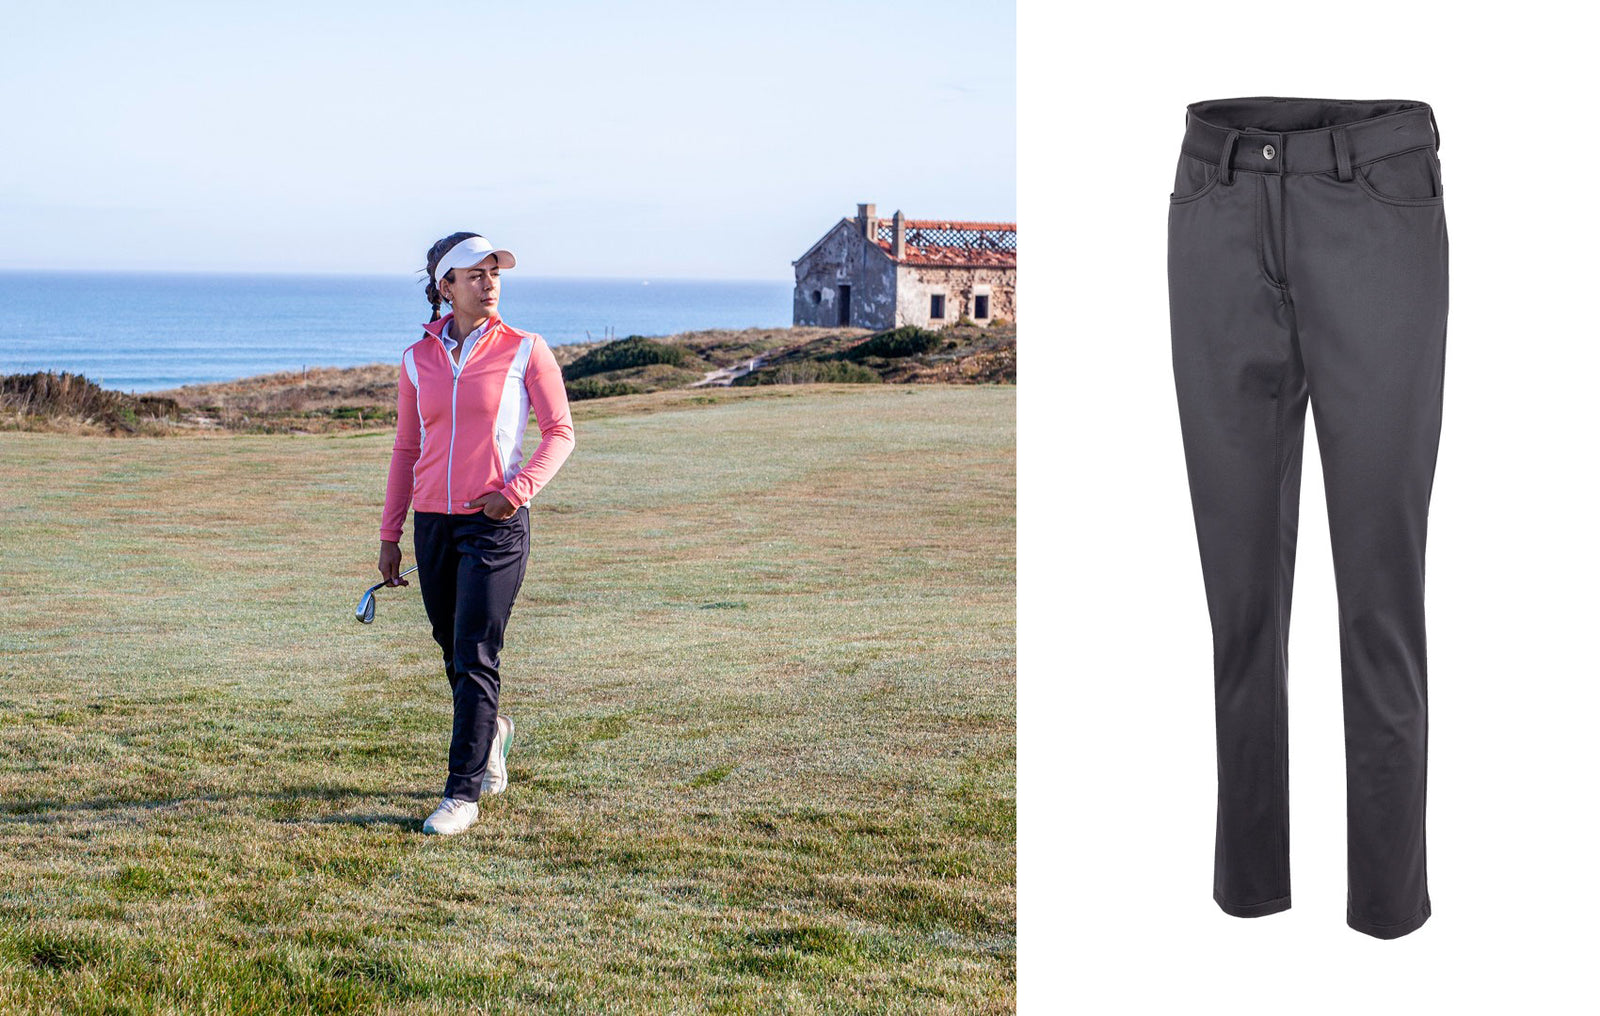 A photo of a woman on a golf course wearing windproof golf pants side by side with a cut image of the same pants,